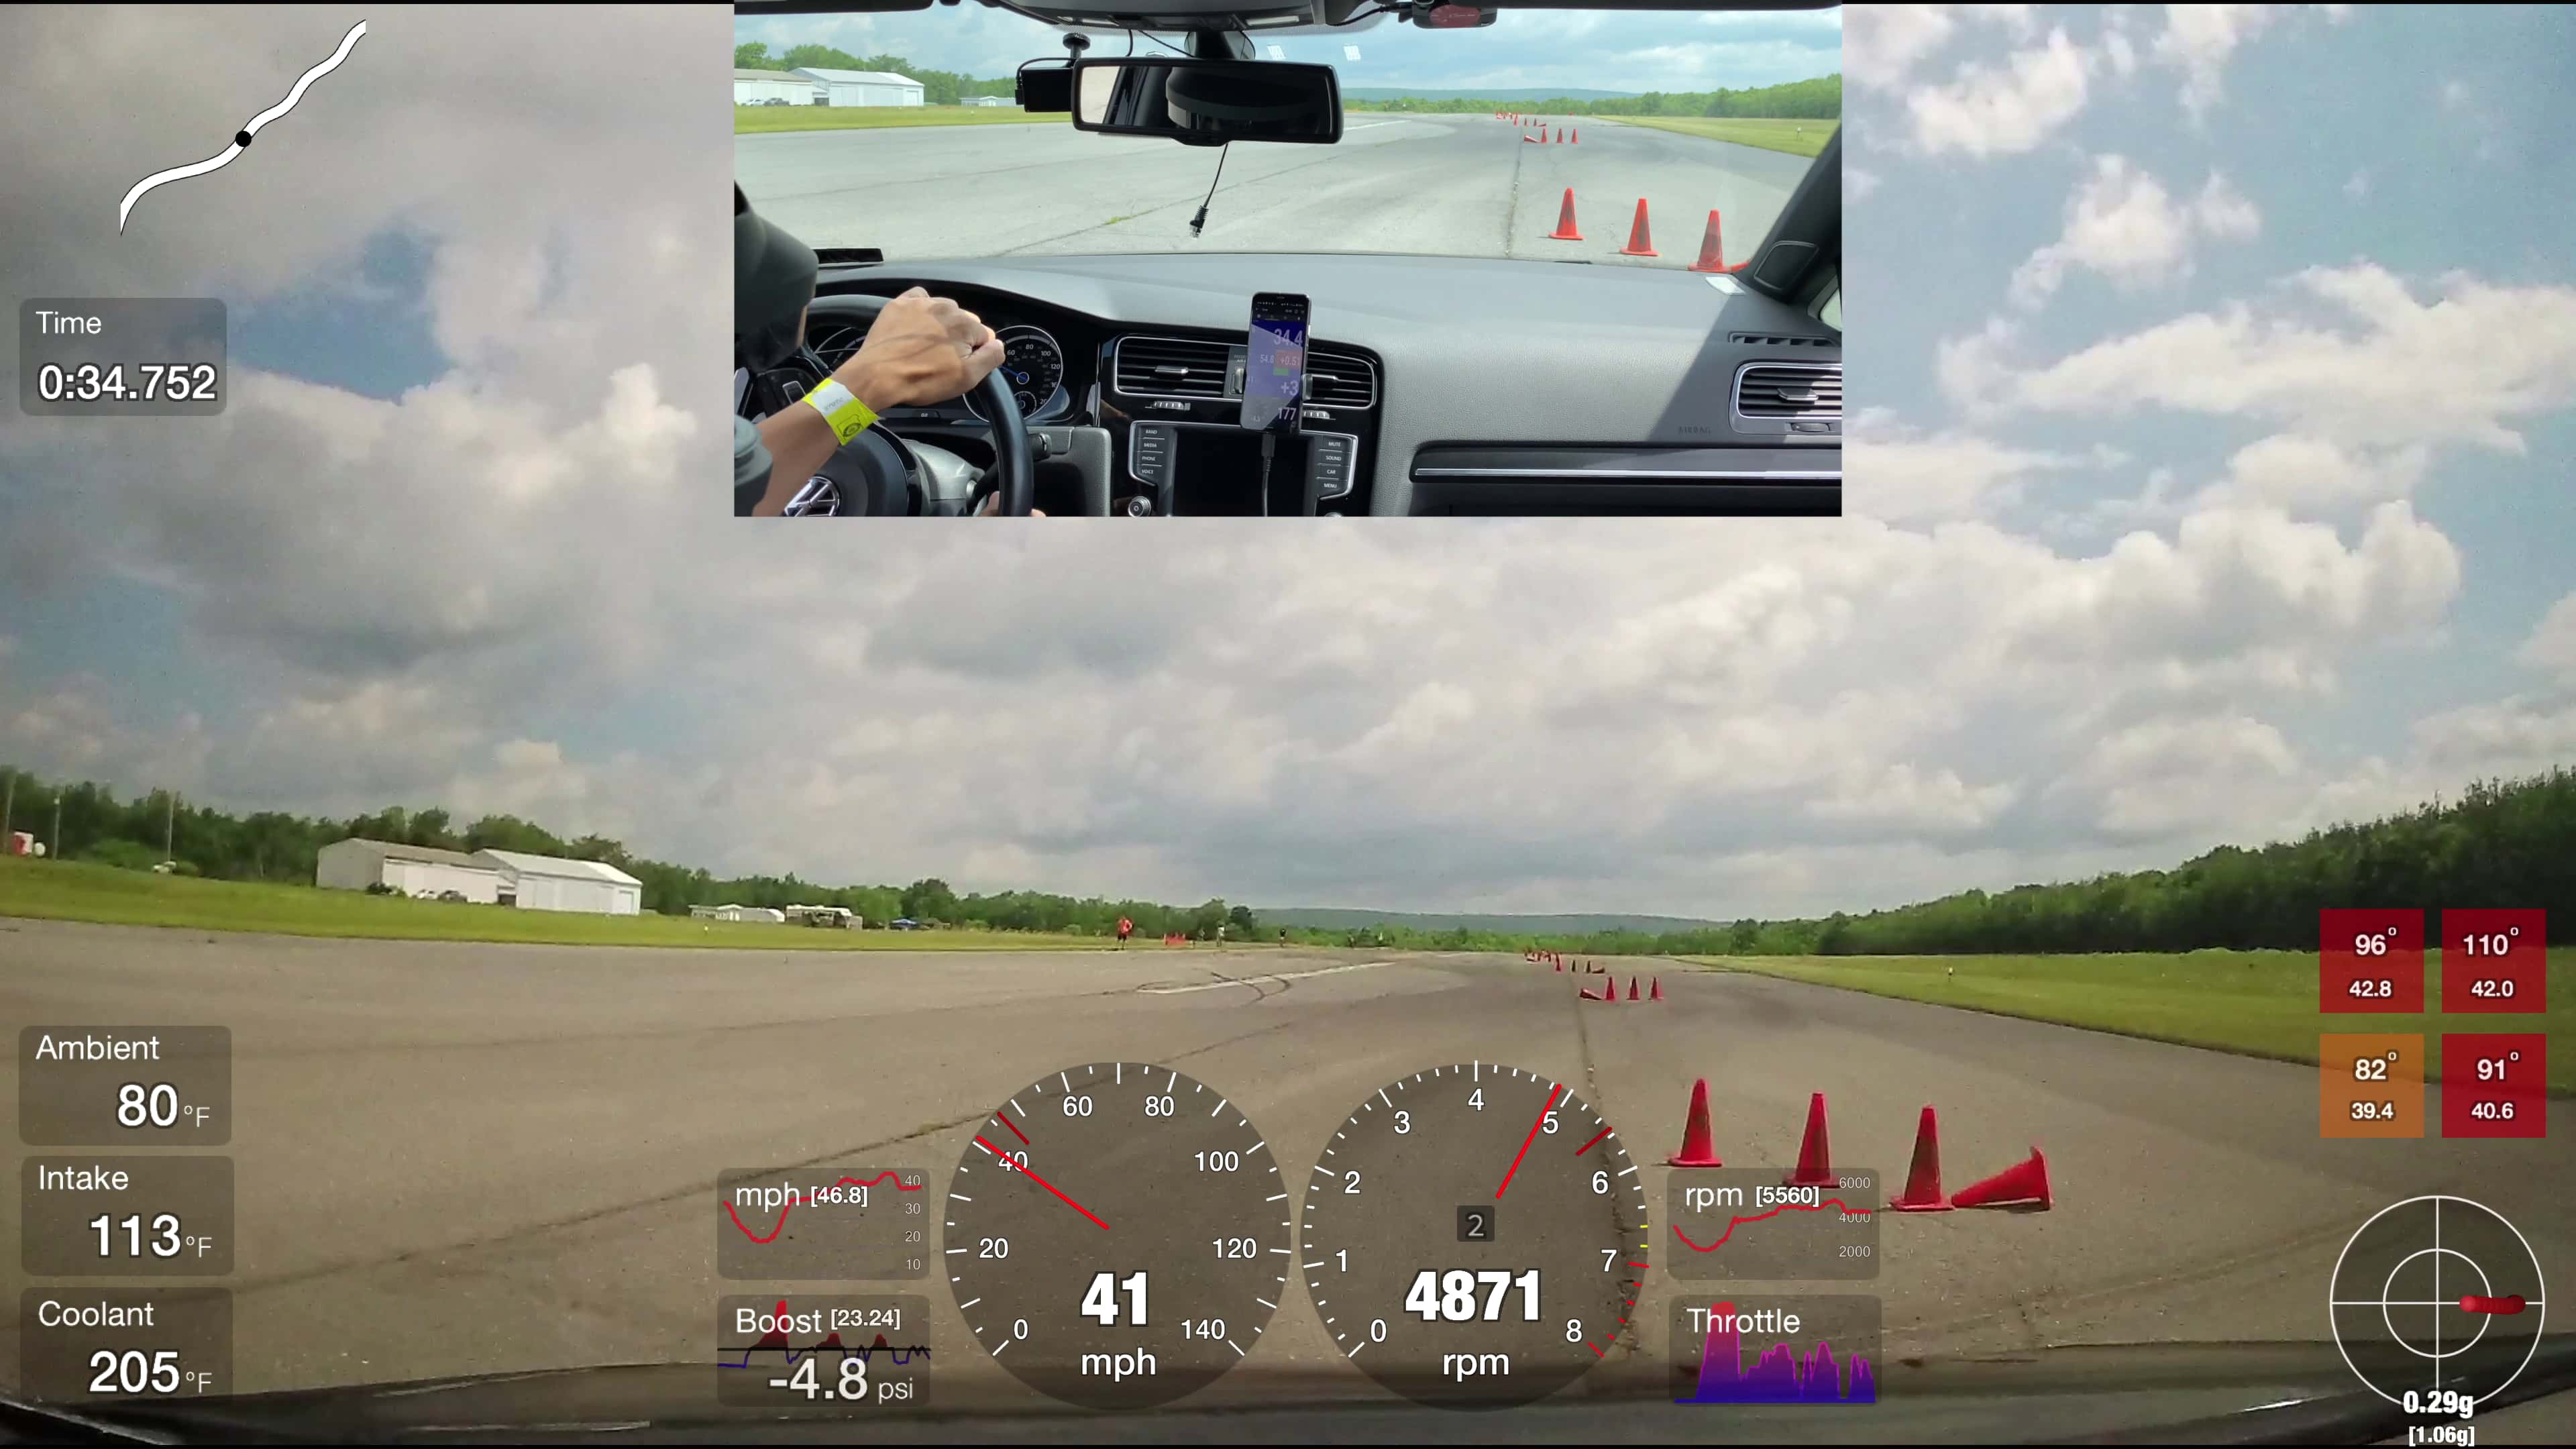 Example video render of a car on an autocross track, with a cone obstacle course, and an overlay of car data including speed and RPM